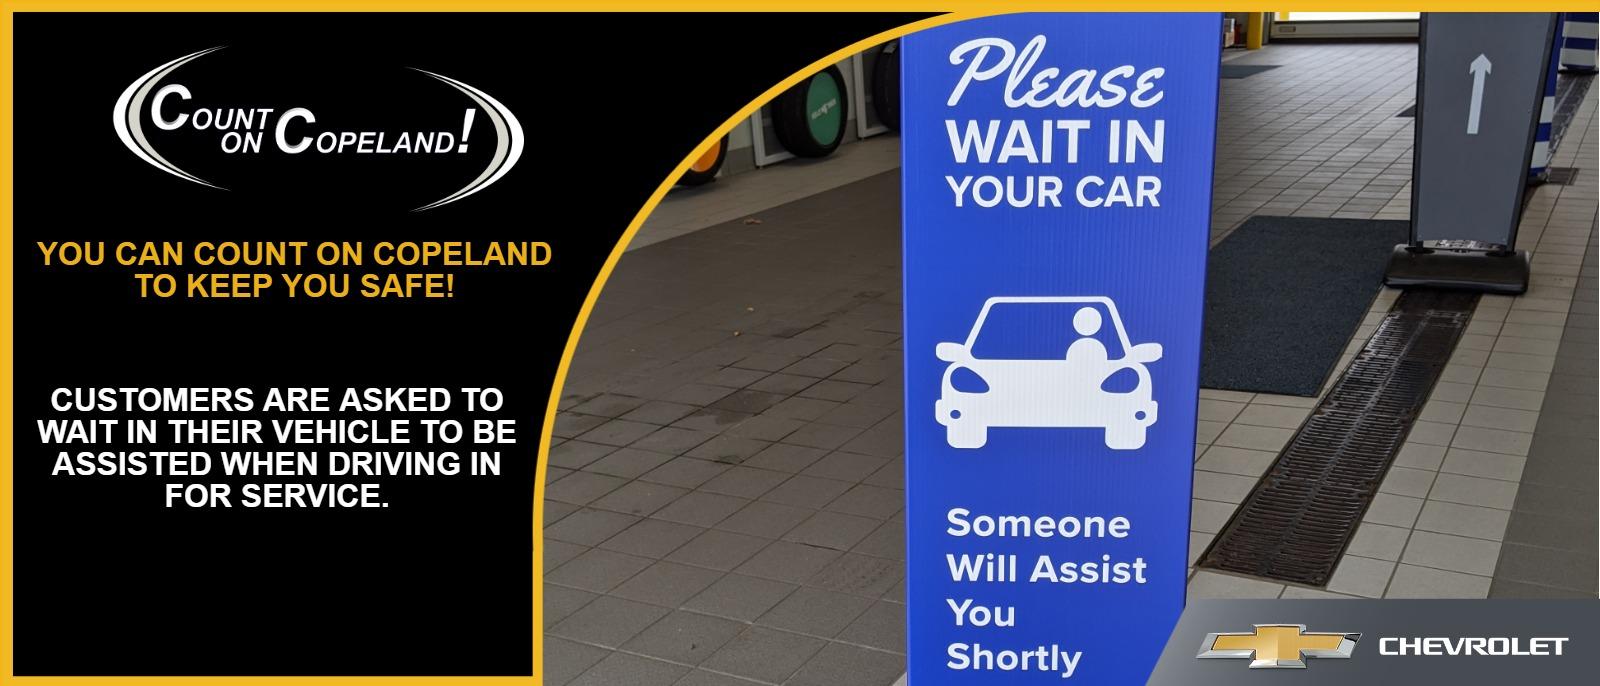 Please wait in your vehicle to be assisted.